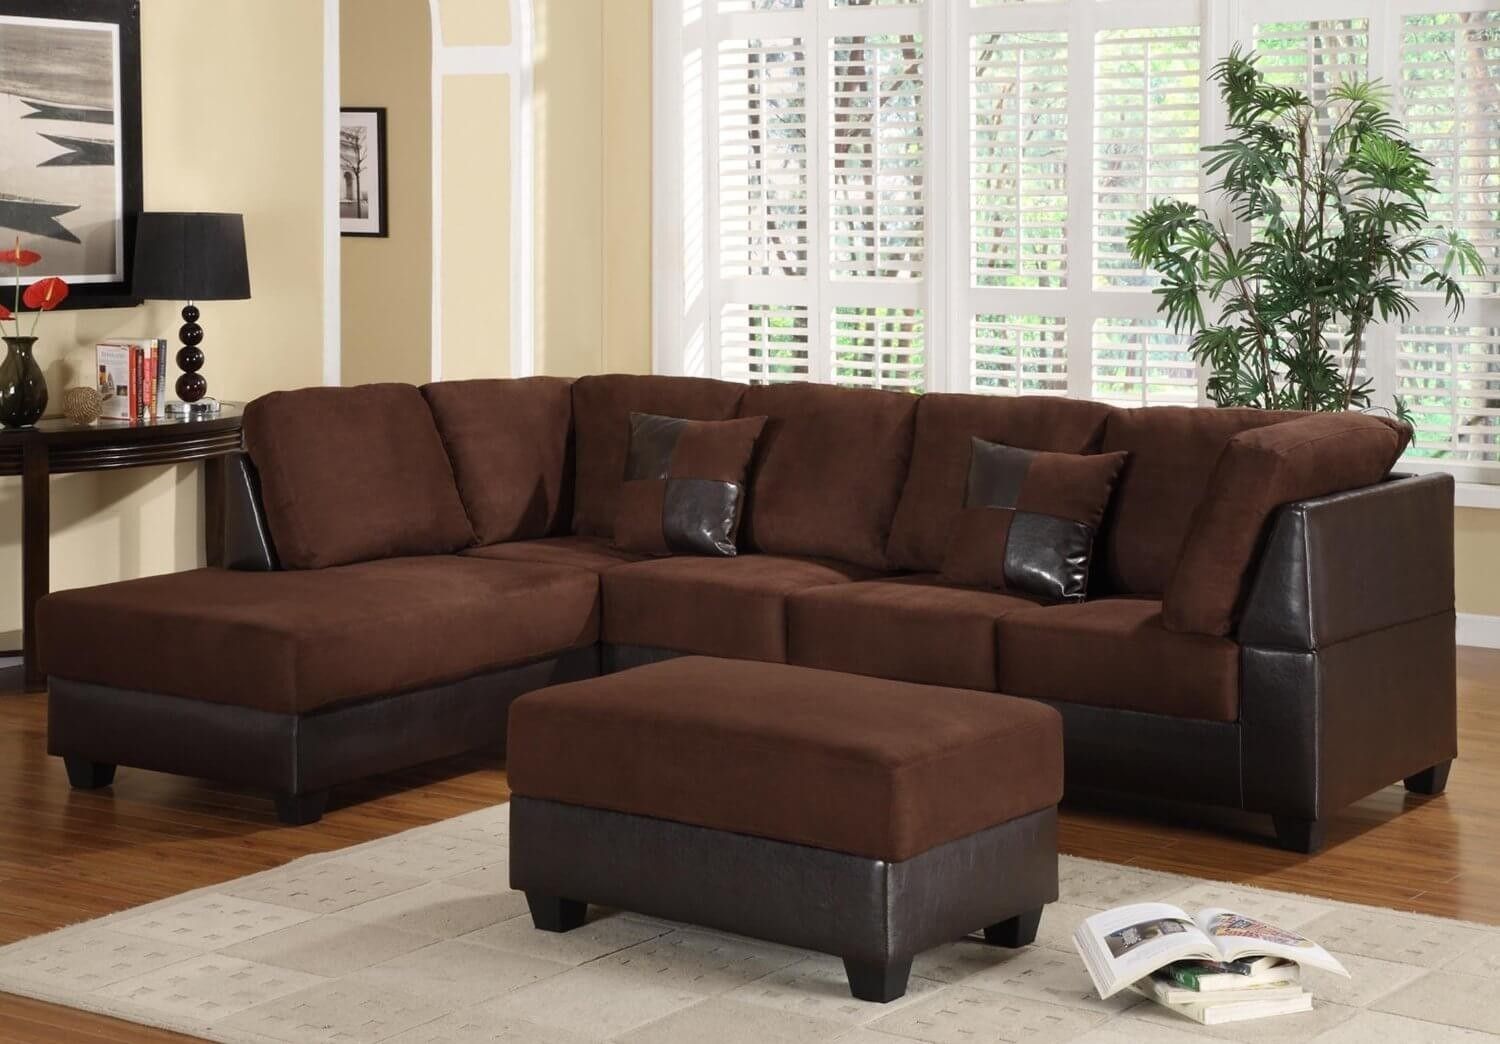 Inspirational Soft Sectional Sofa Under 400 – Mediasupload Within Sectional Sofas Under 400 (Photo 1 of 15)